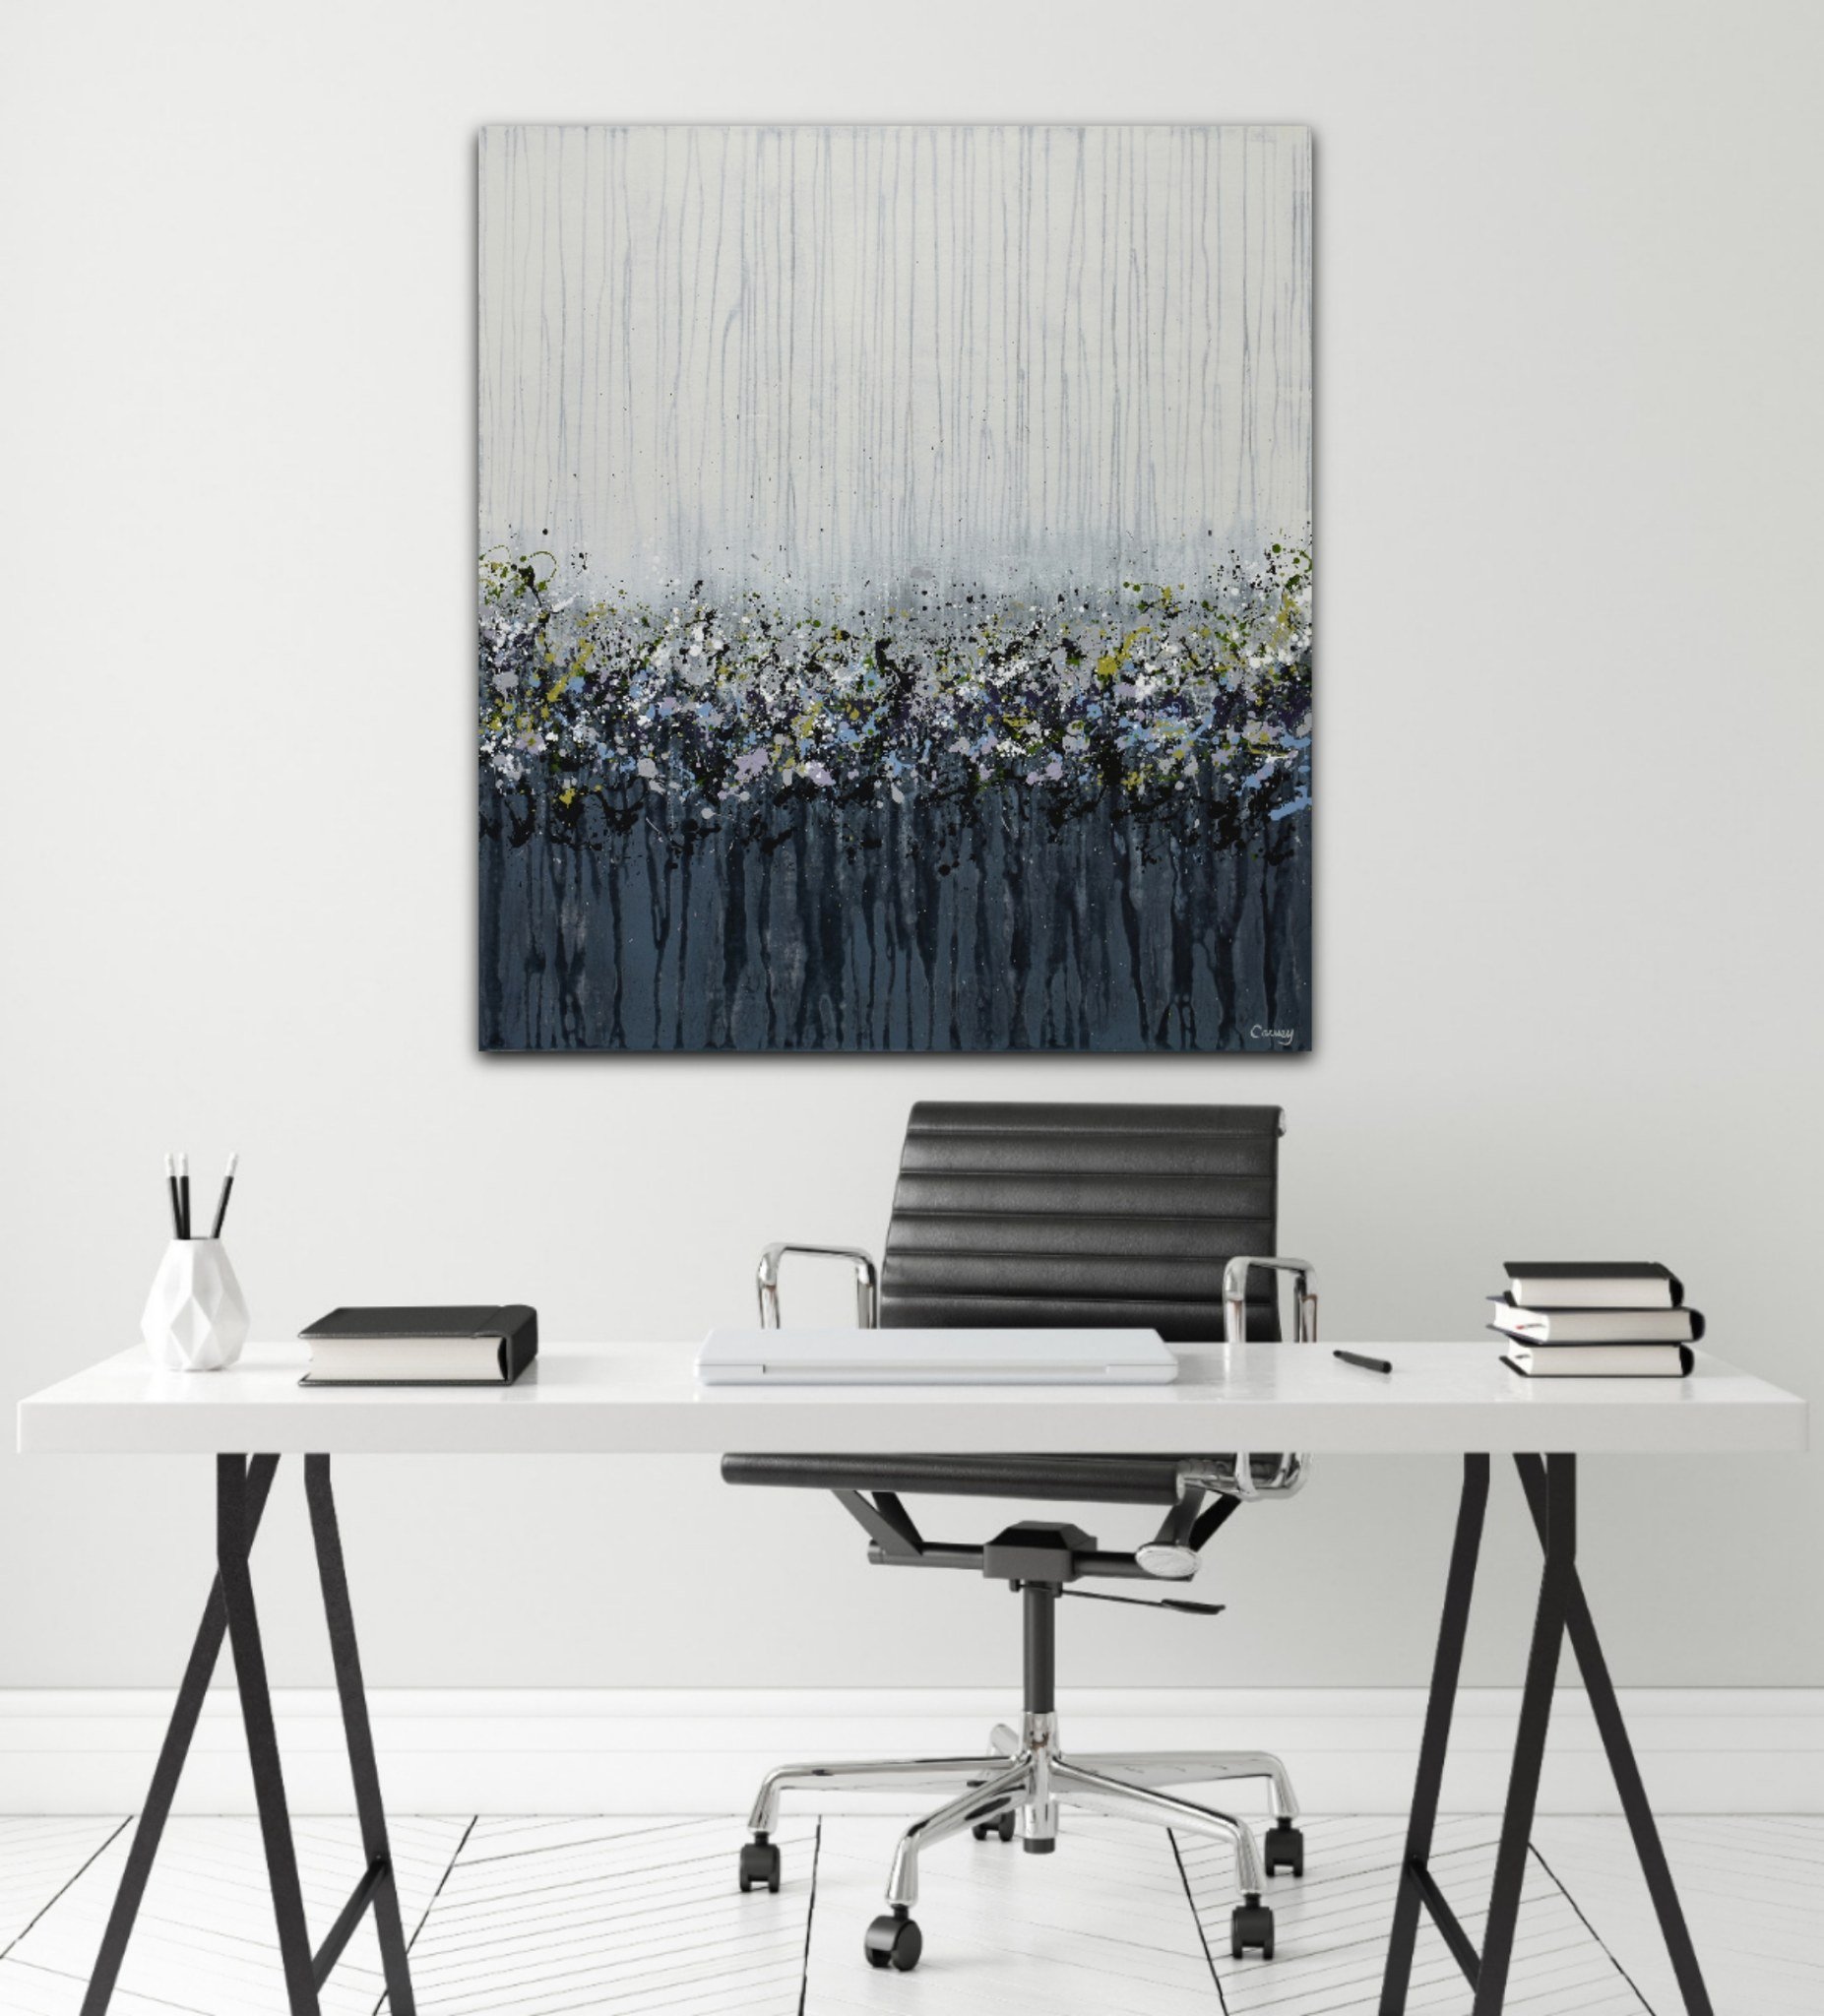 Explore the enchanting &quot;Midnight Moss&quot; artwork in beautiful in-context images. See how it brings harmony to different spaces like living rooms and offices. Experience its unique creativity, originality, and calm charm firsthand.
...
D&eacut